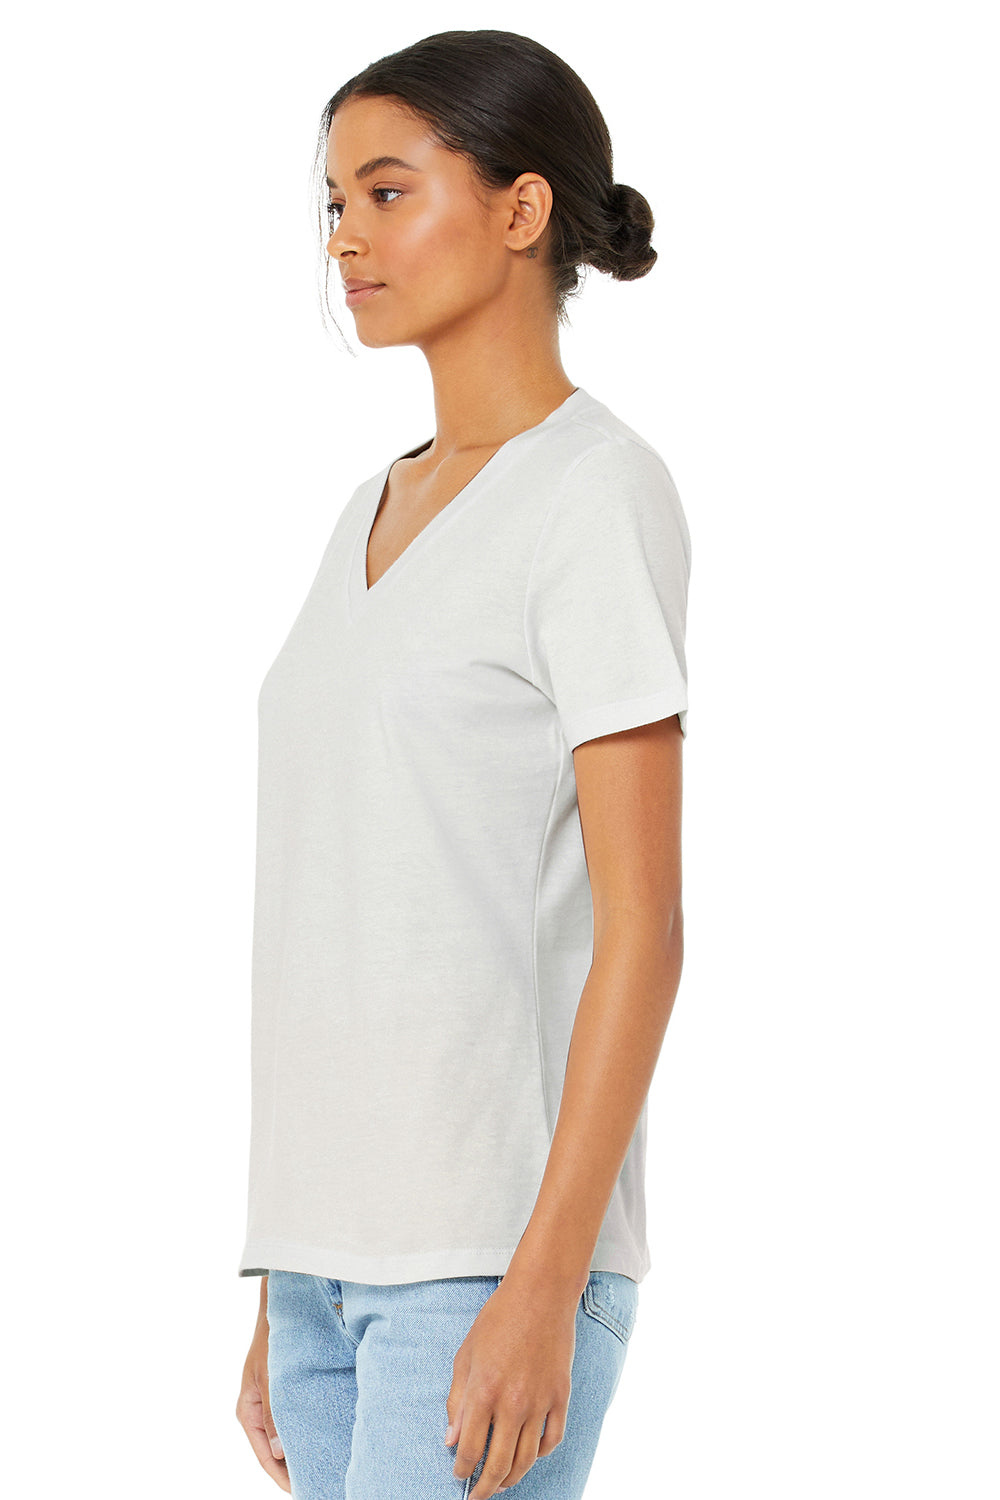 Bella + Canvas BC6405/6405 Womens Relaxed Jersey Short Sleeve V-Neck T-Shirt Vintage White Model 3Q